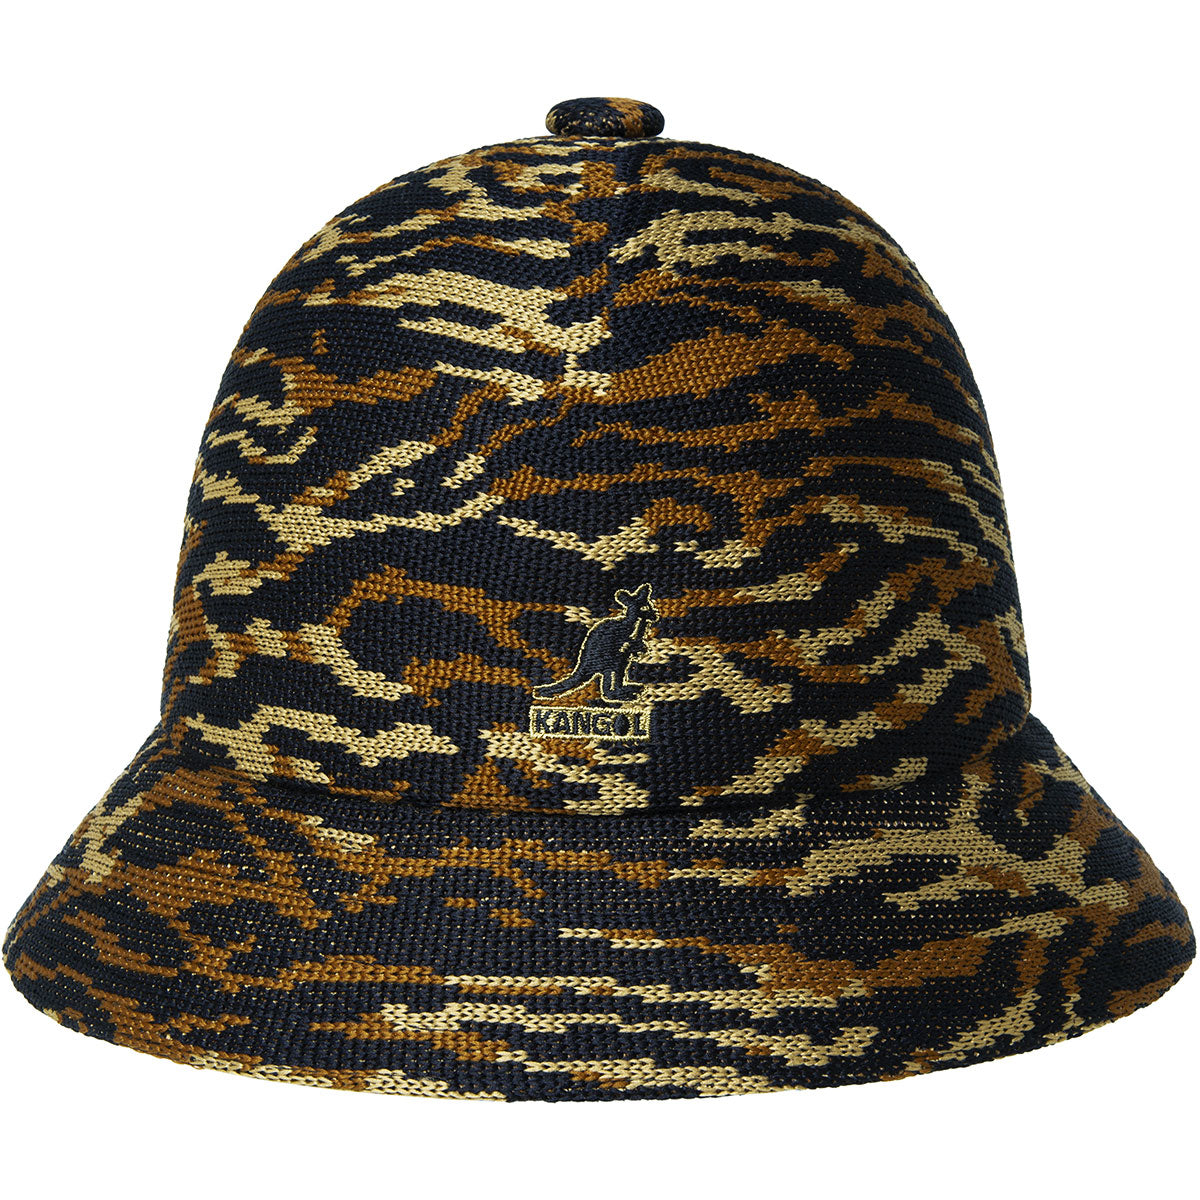 Hat with animal print and front logo